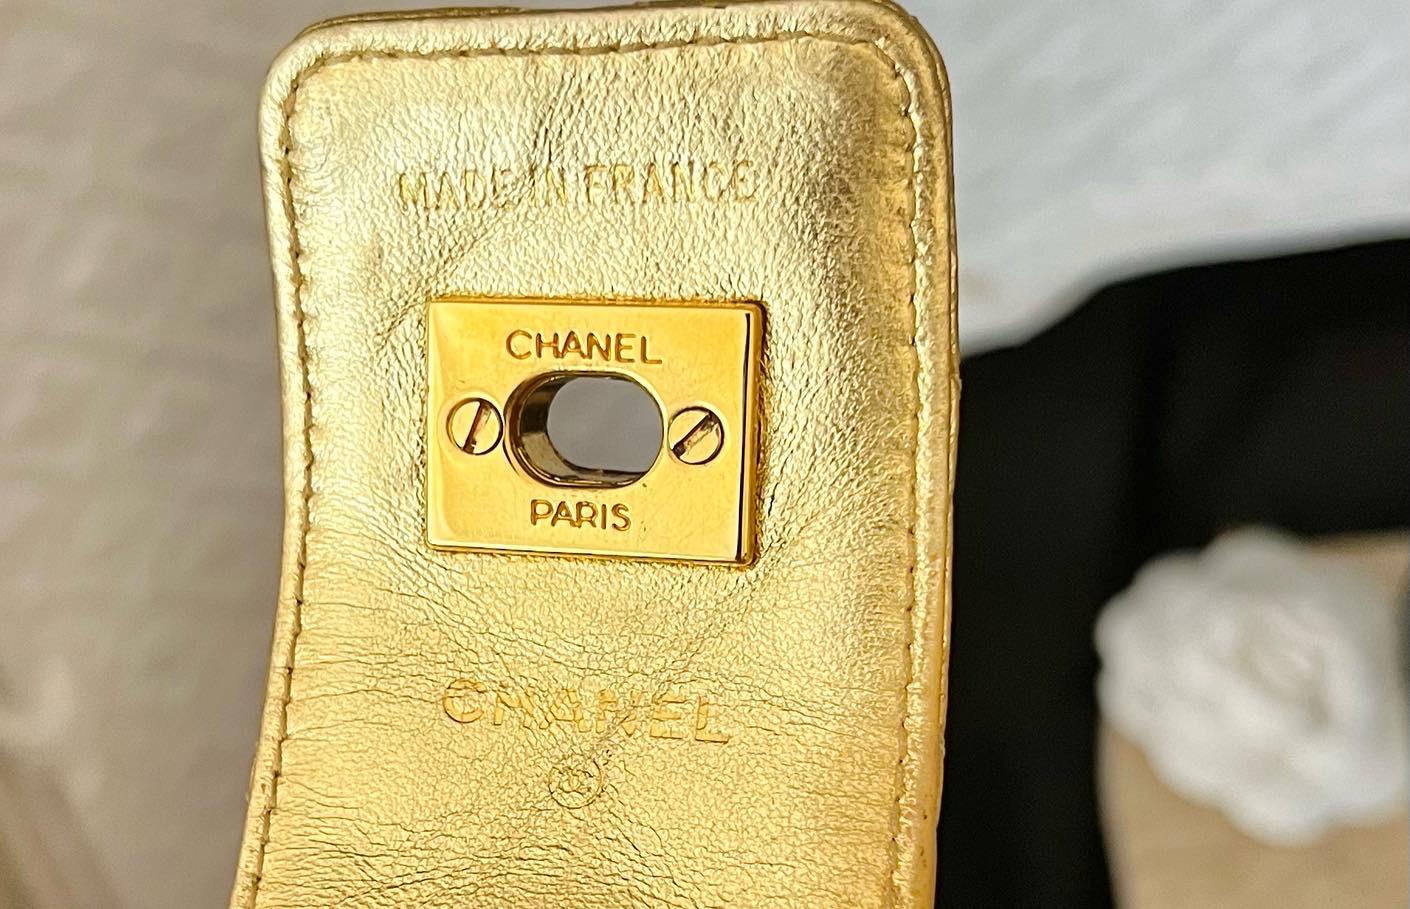 Rare Chanel Runway 1992 quilted gold leather turnlock CC logo choker necklace 24k gold plated very good condition 